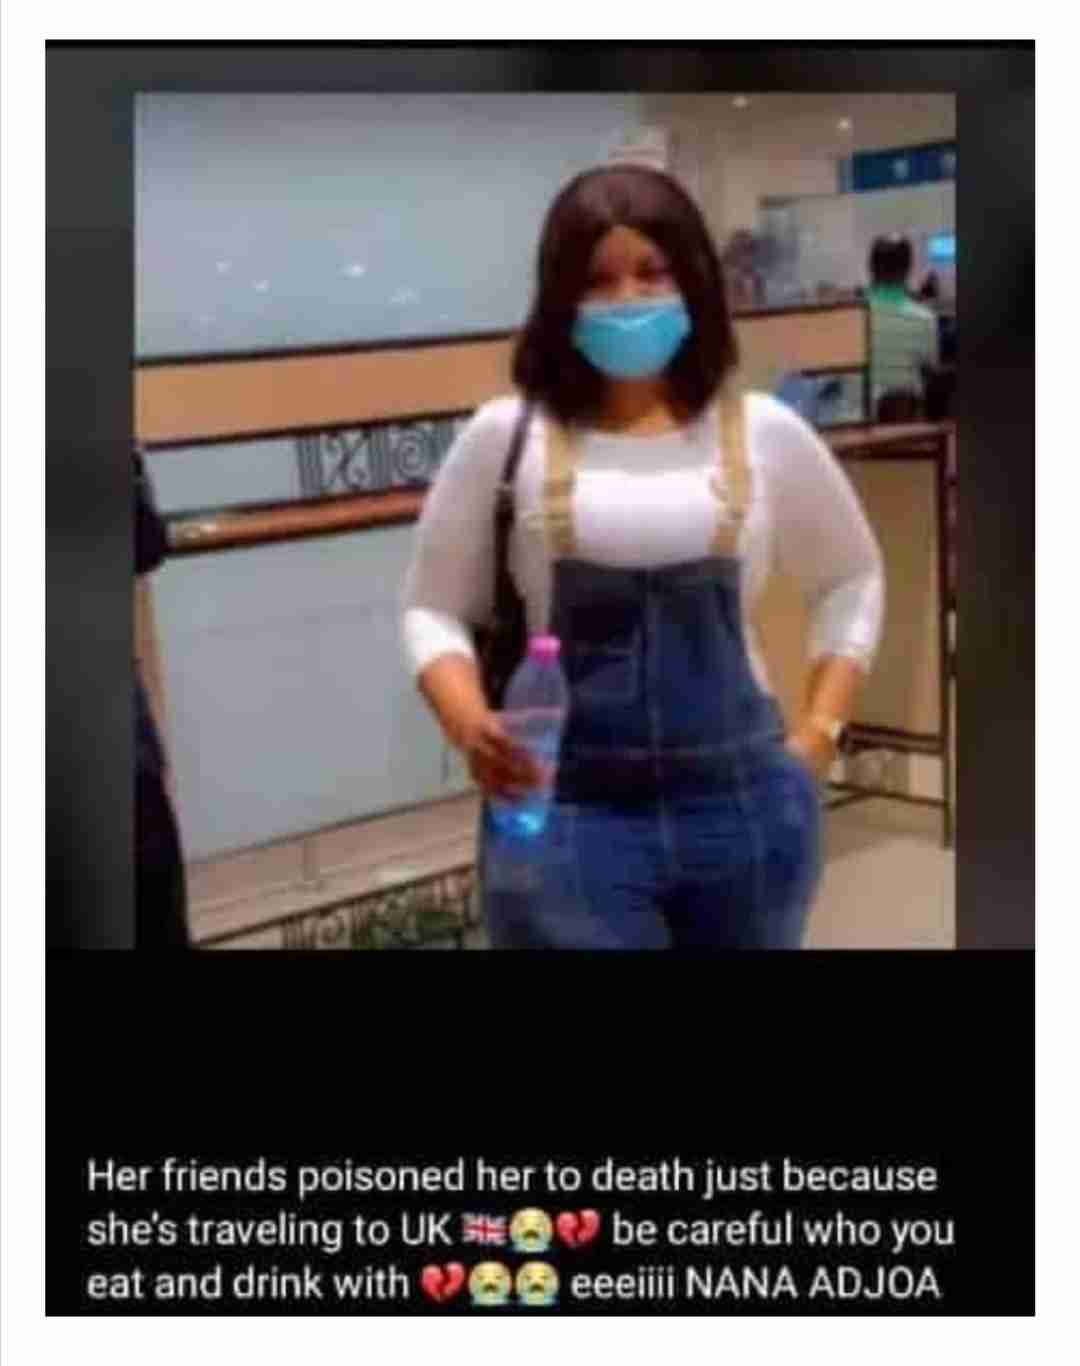 Lady poisoned to death by close friends over UK trip 2